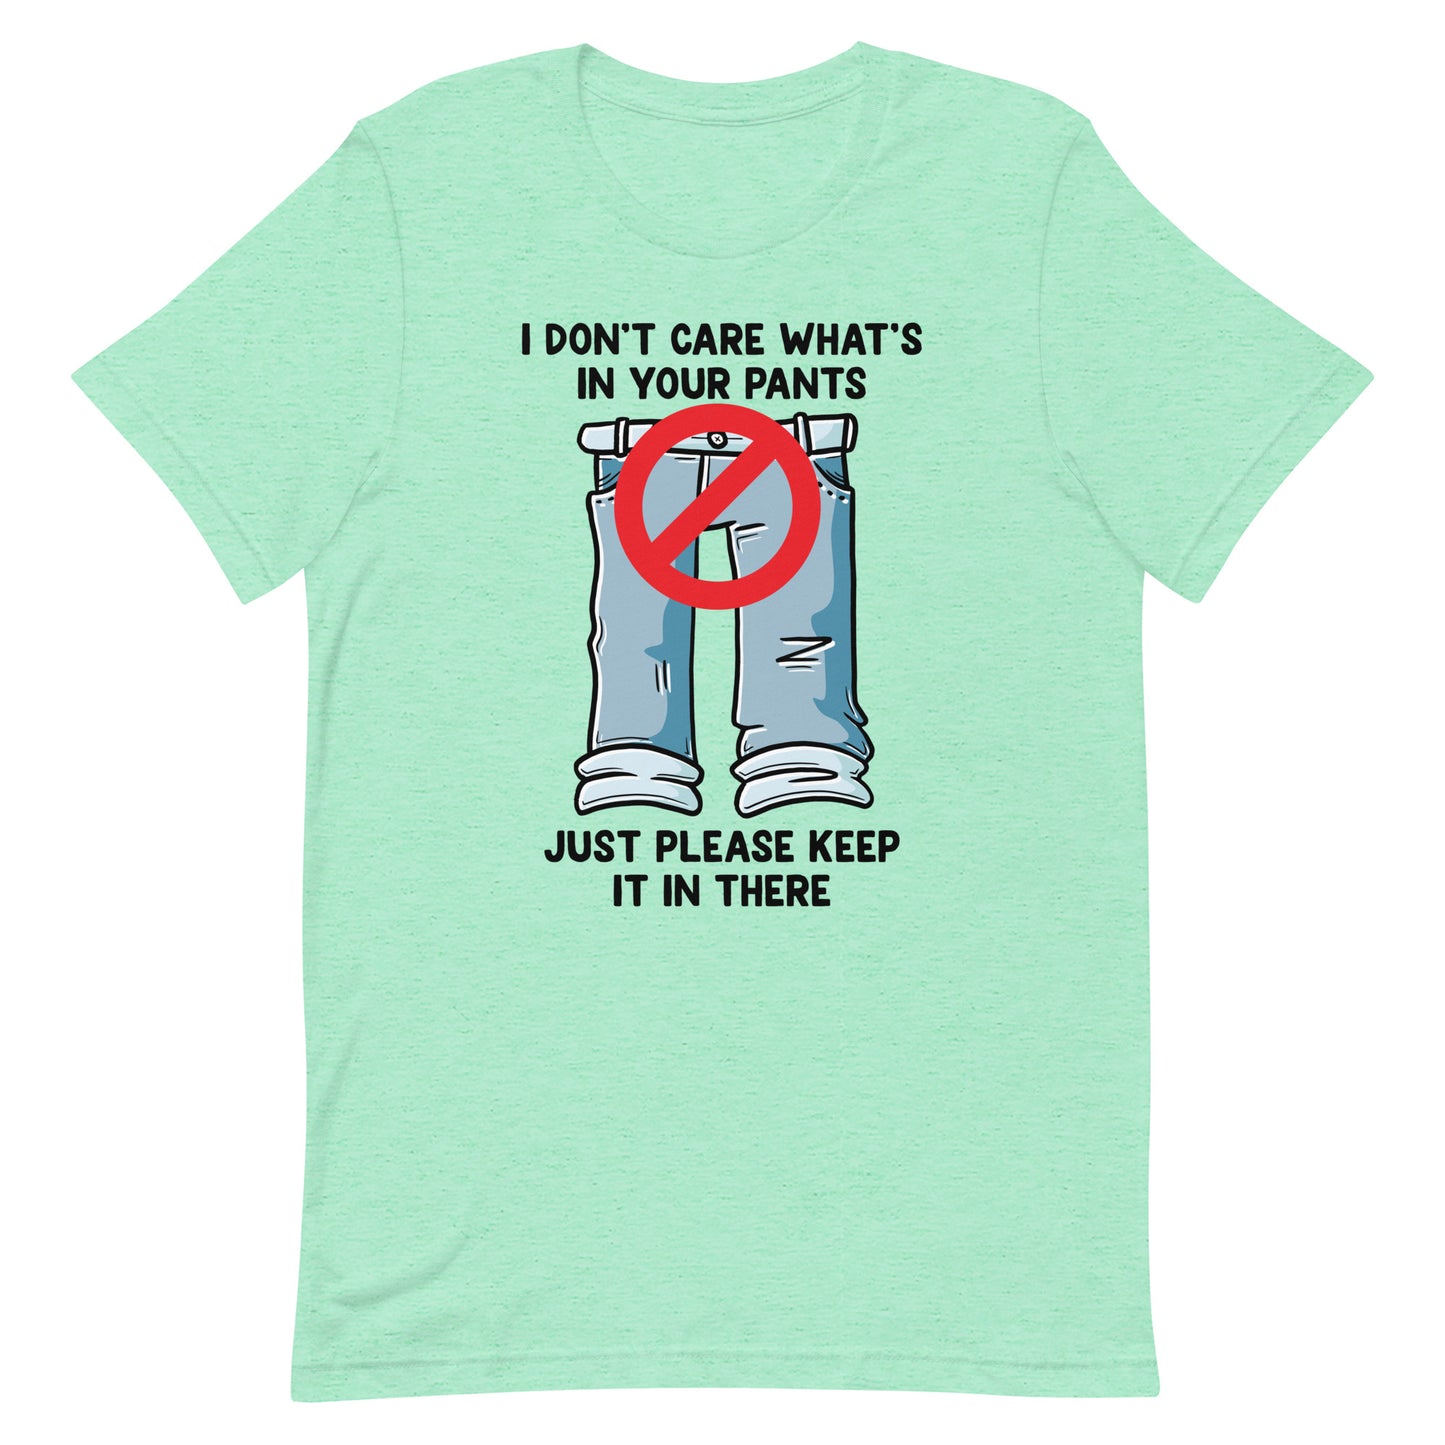 I Don't Care What's In Your Pants Unisex t-shirt